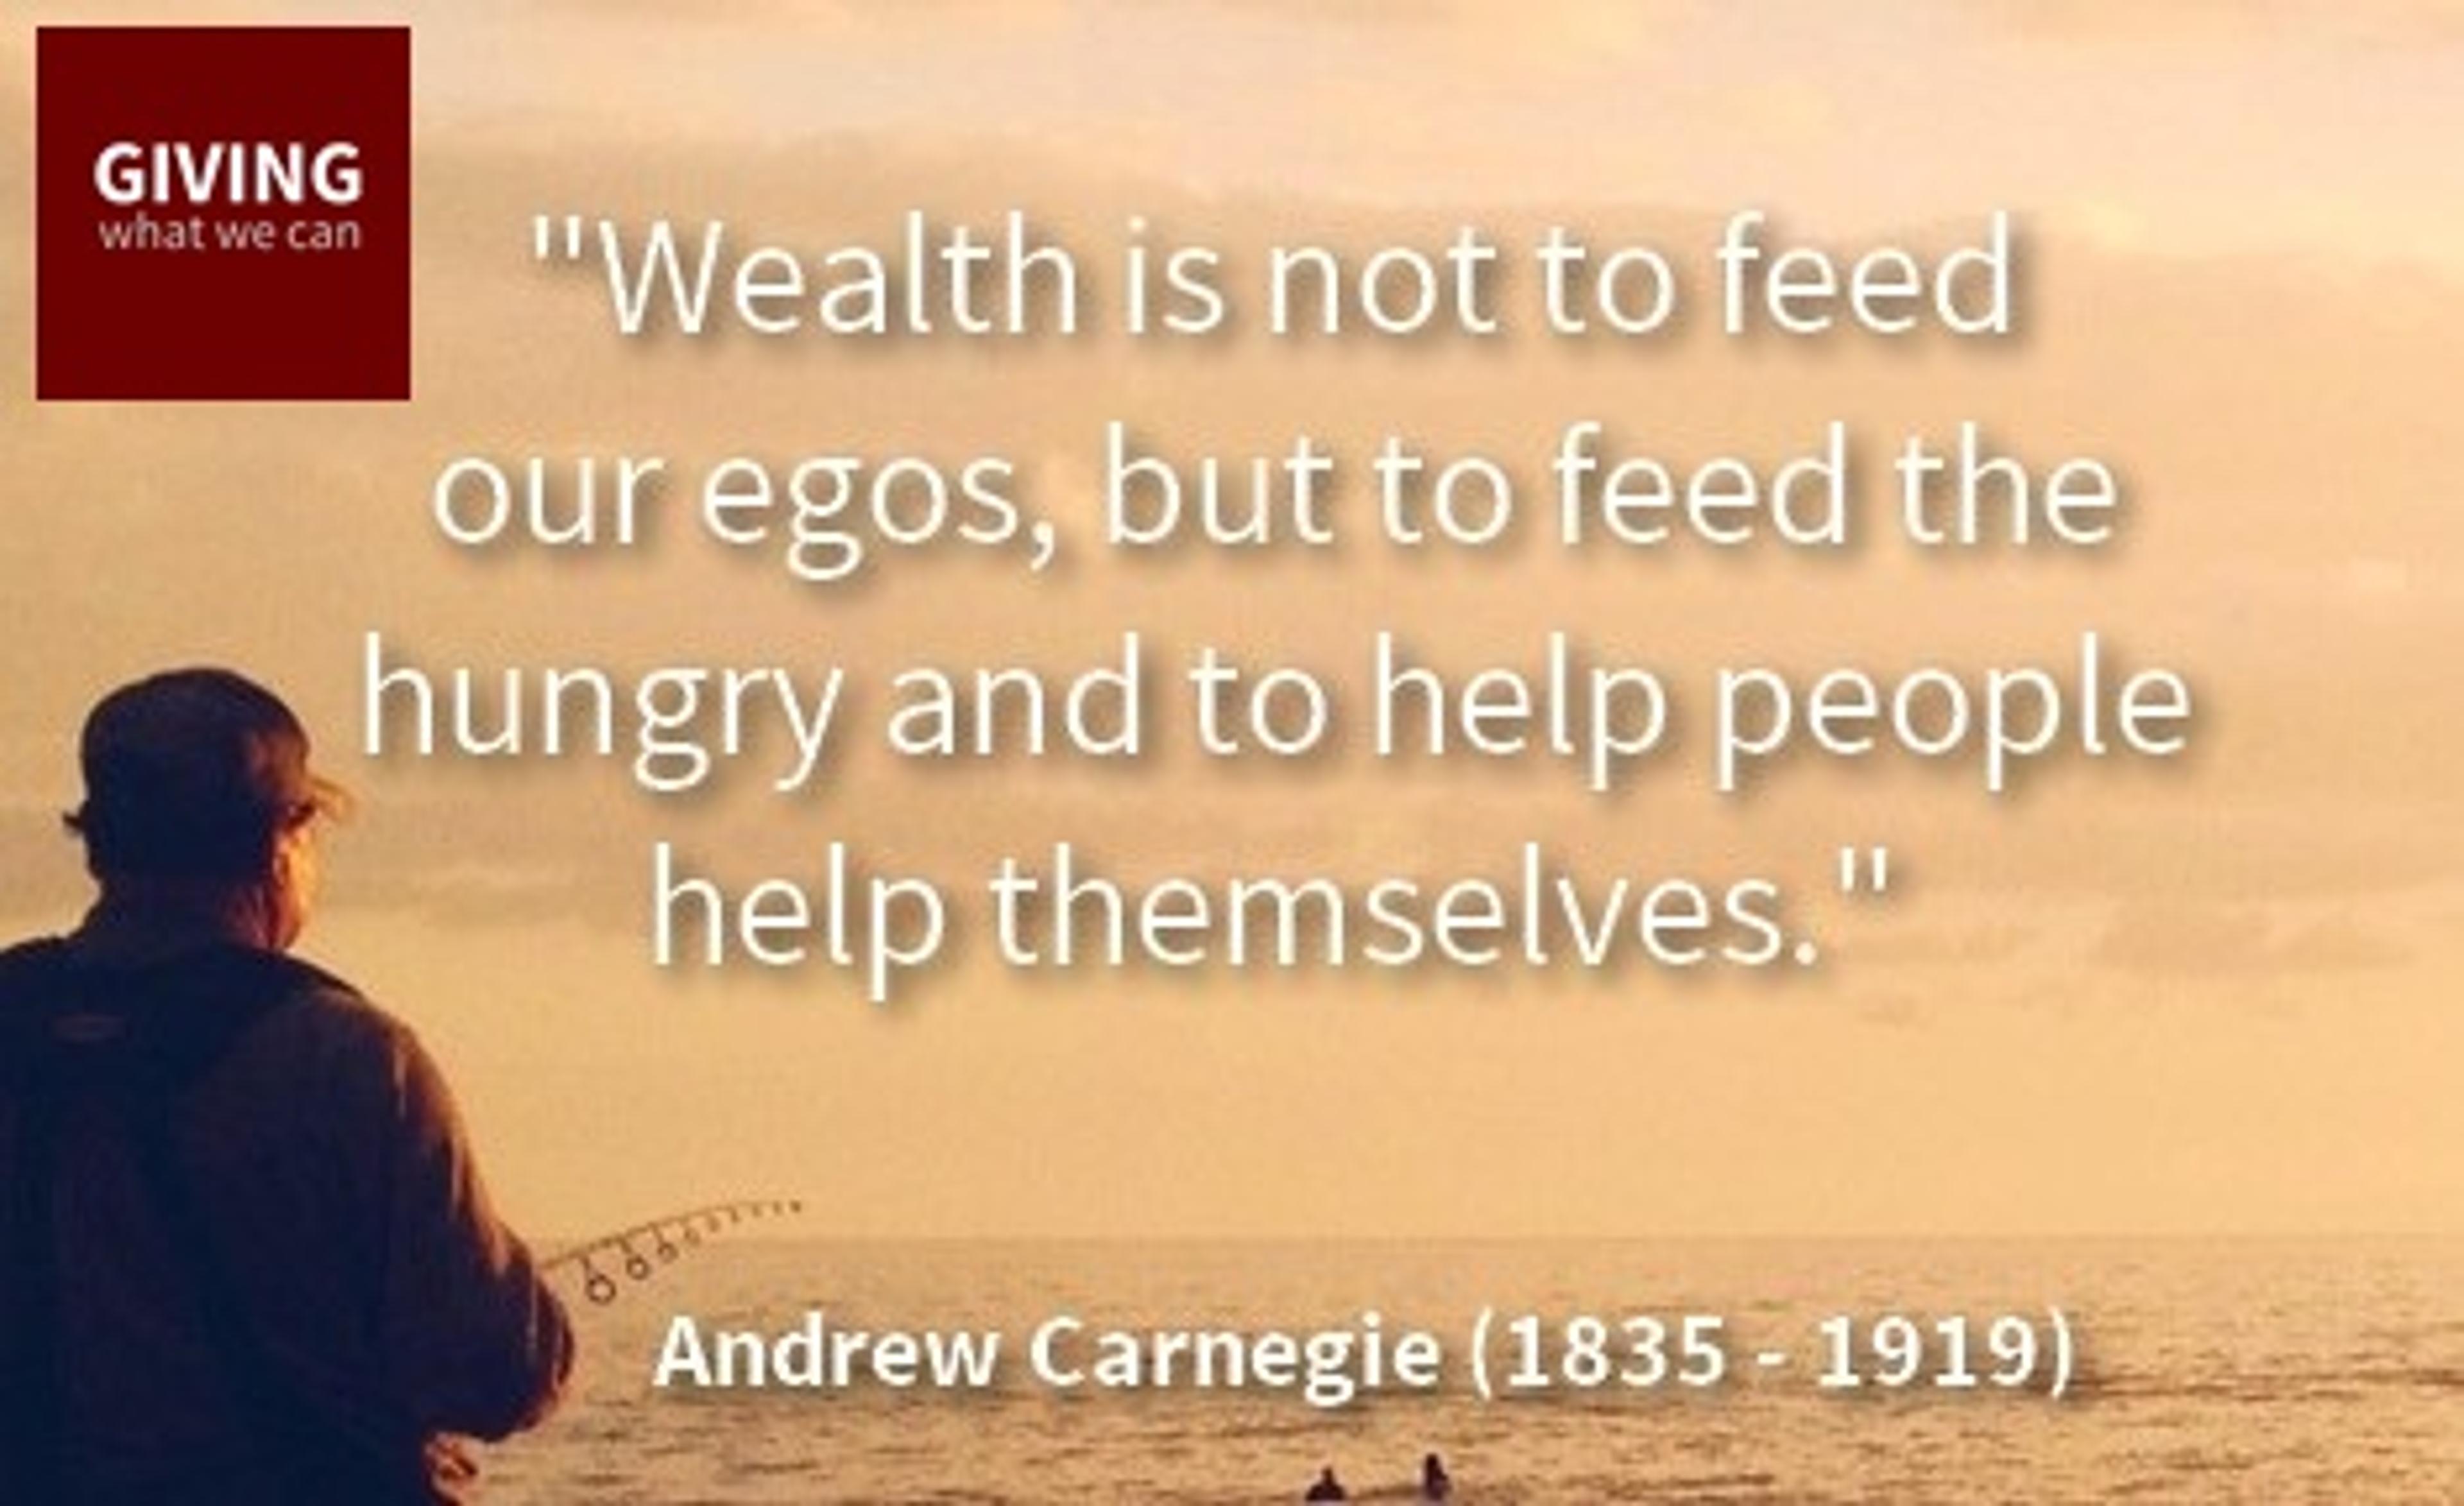 Wealth is not to feed our egos, but to feed the hungry and to help people help themselves